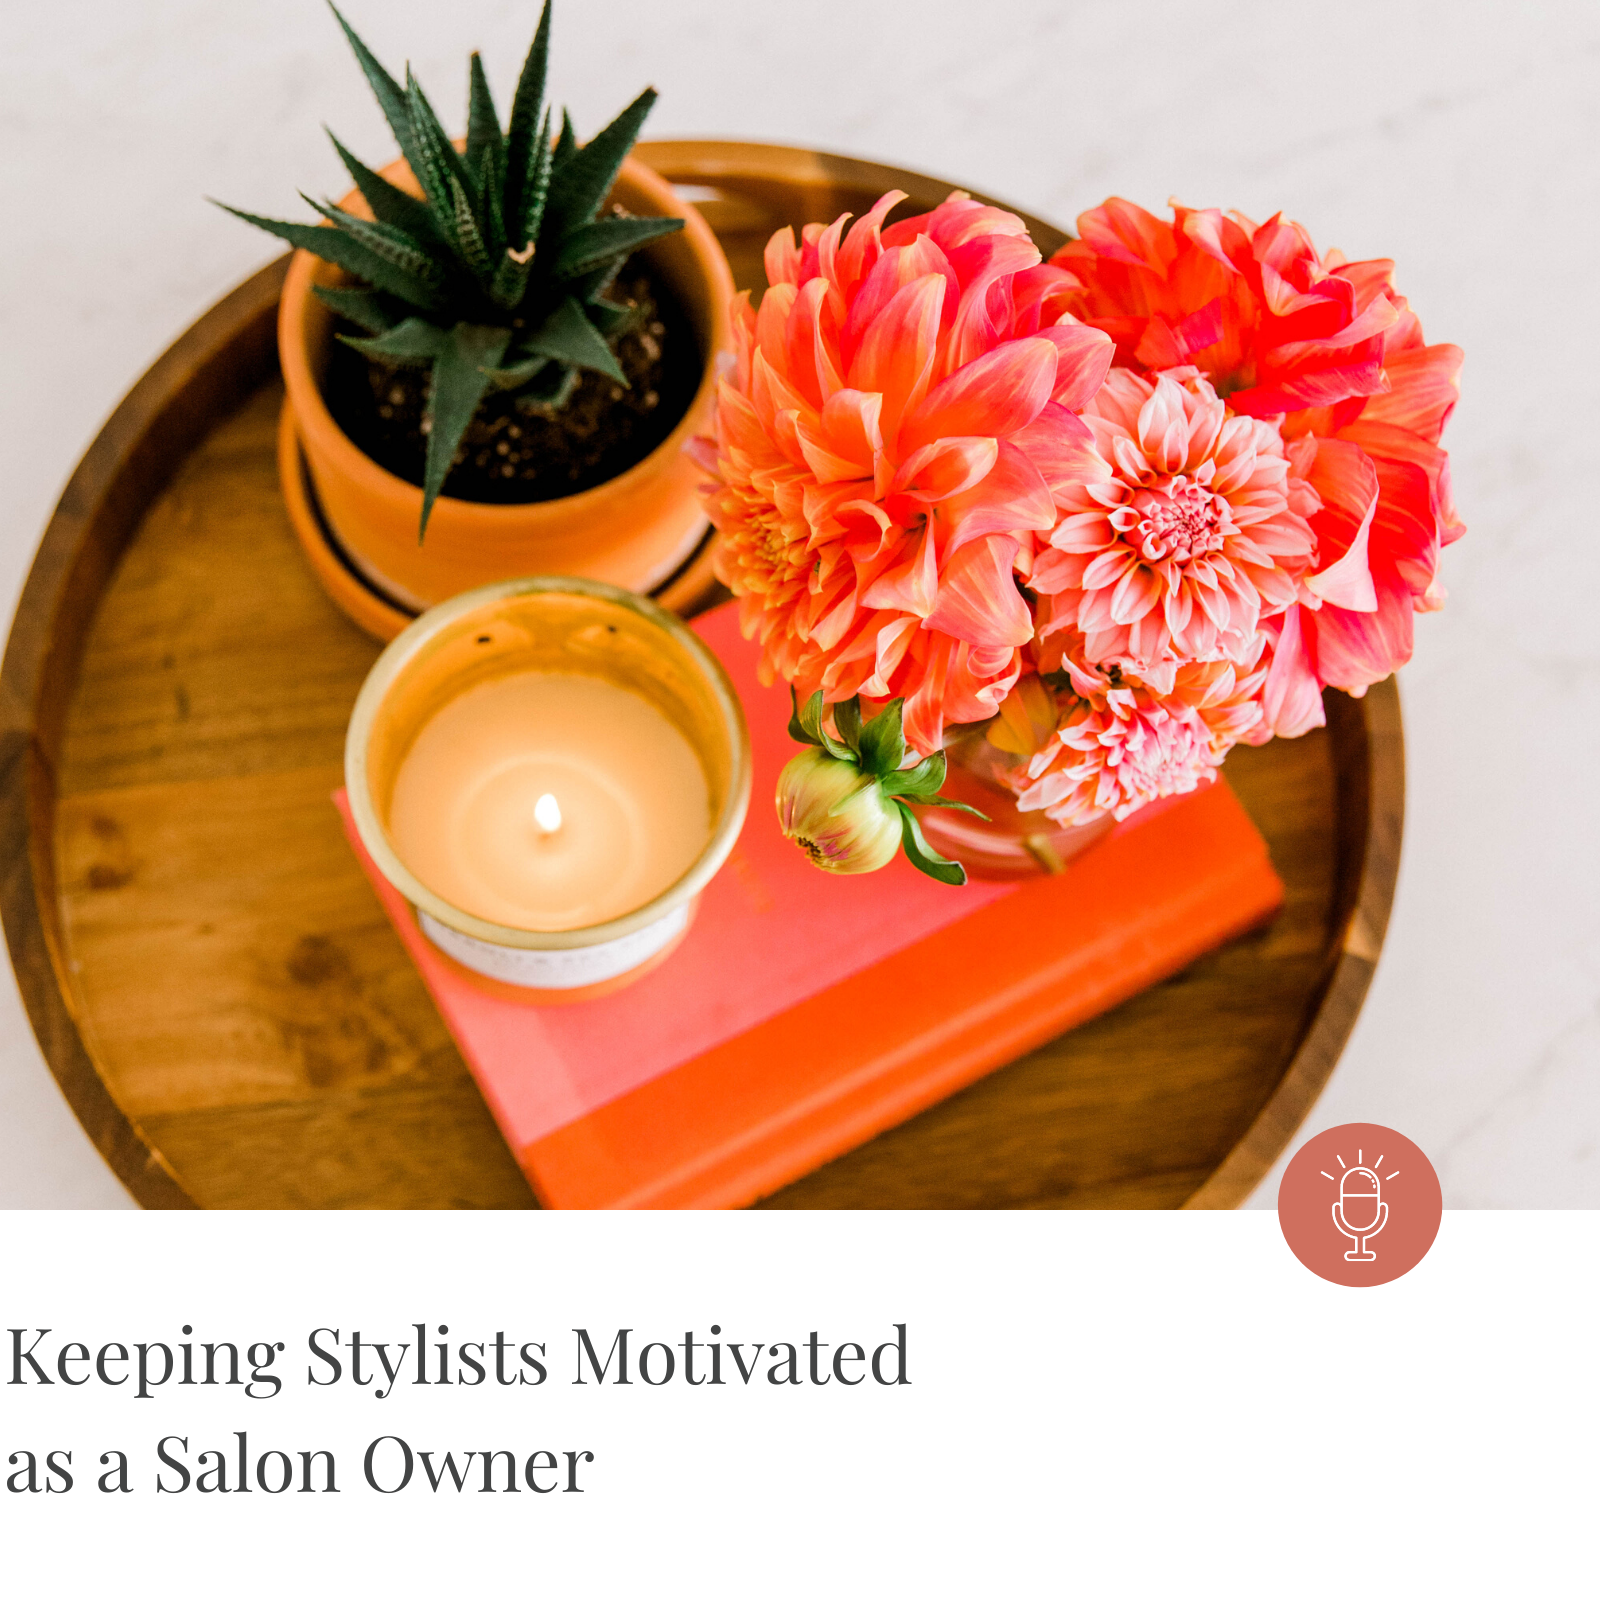 Episode #190- Keeping Stylists Motivated as a Salon Owner